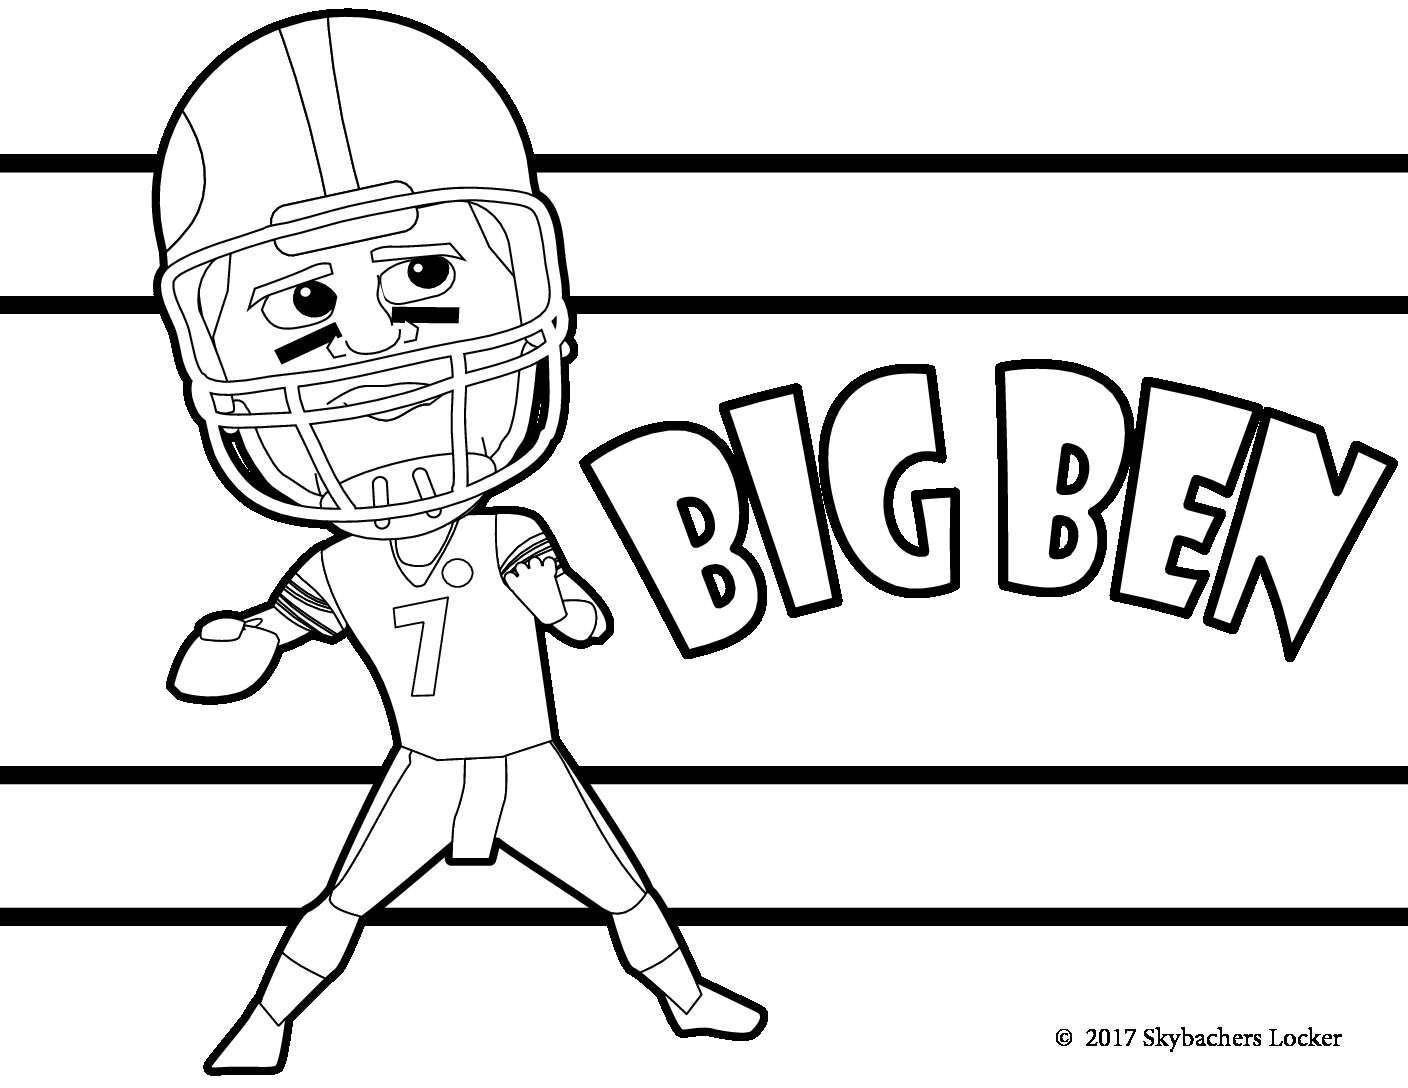 Steelers Coloring Page  Coloring Pages Ideas